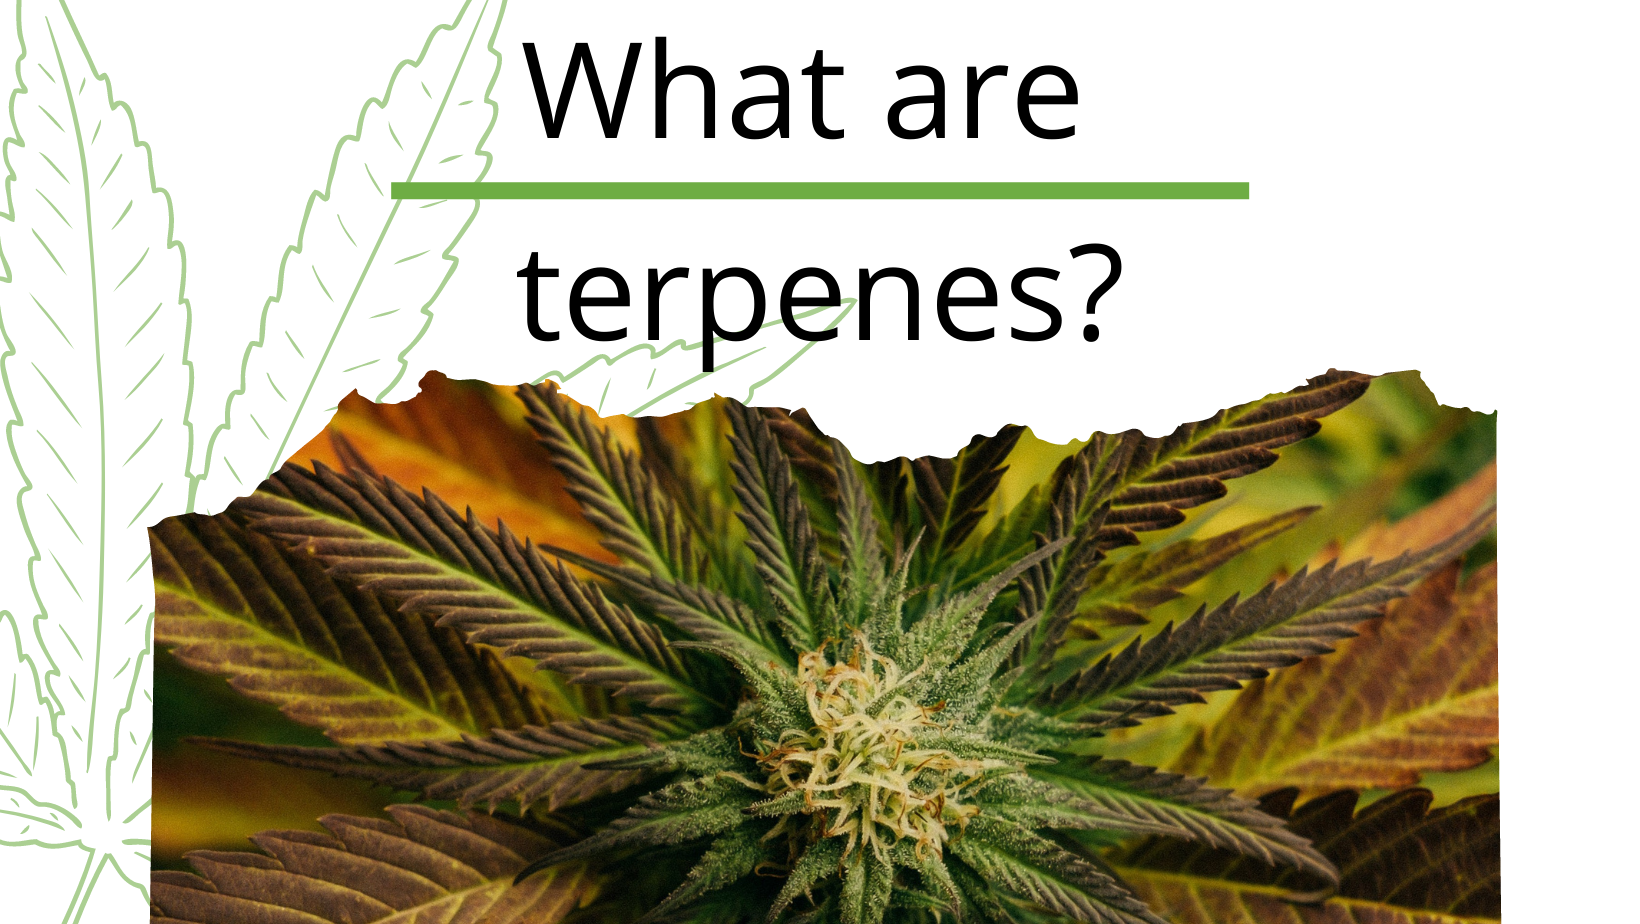 decorative image to promote our blog 'What are terpenes?'